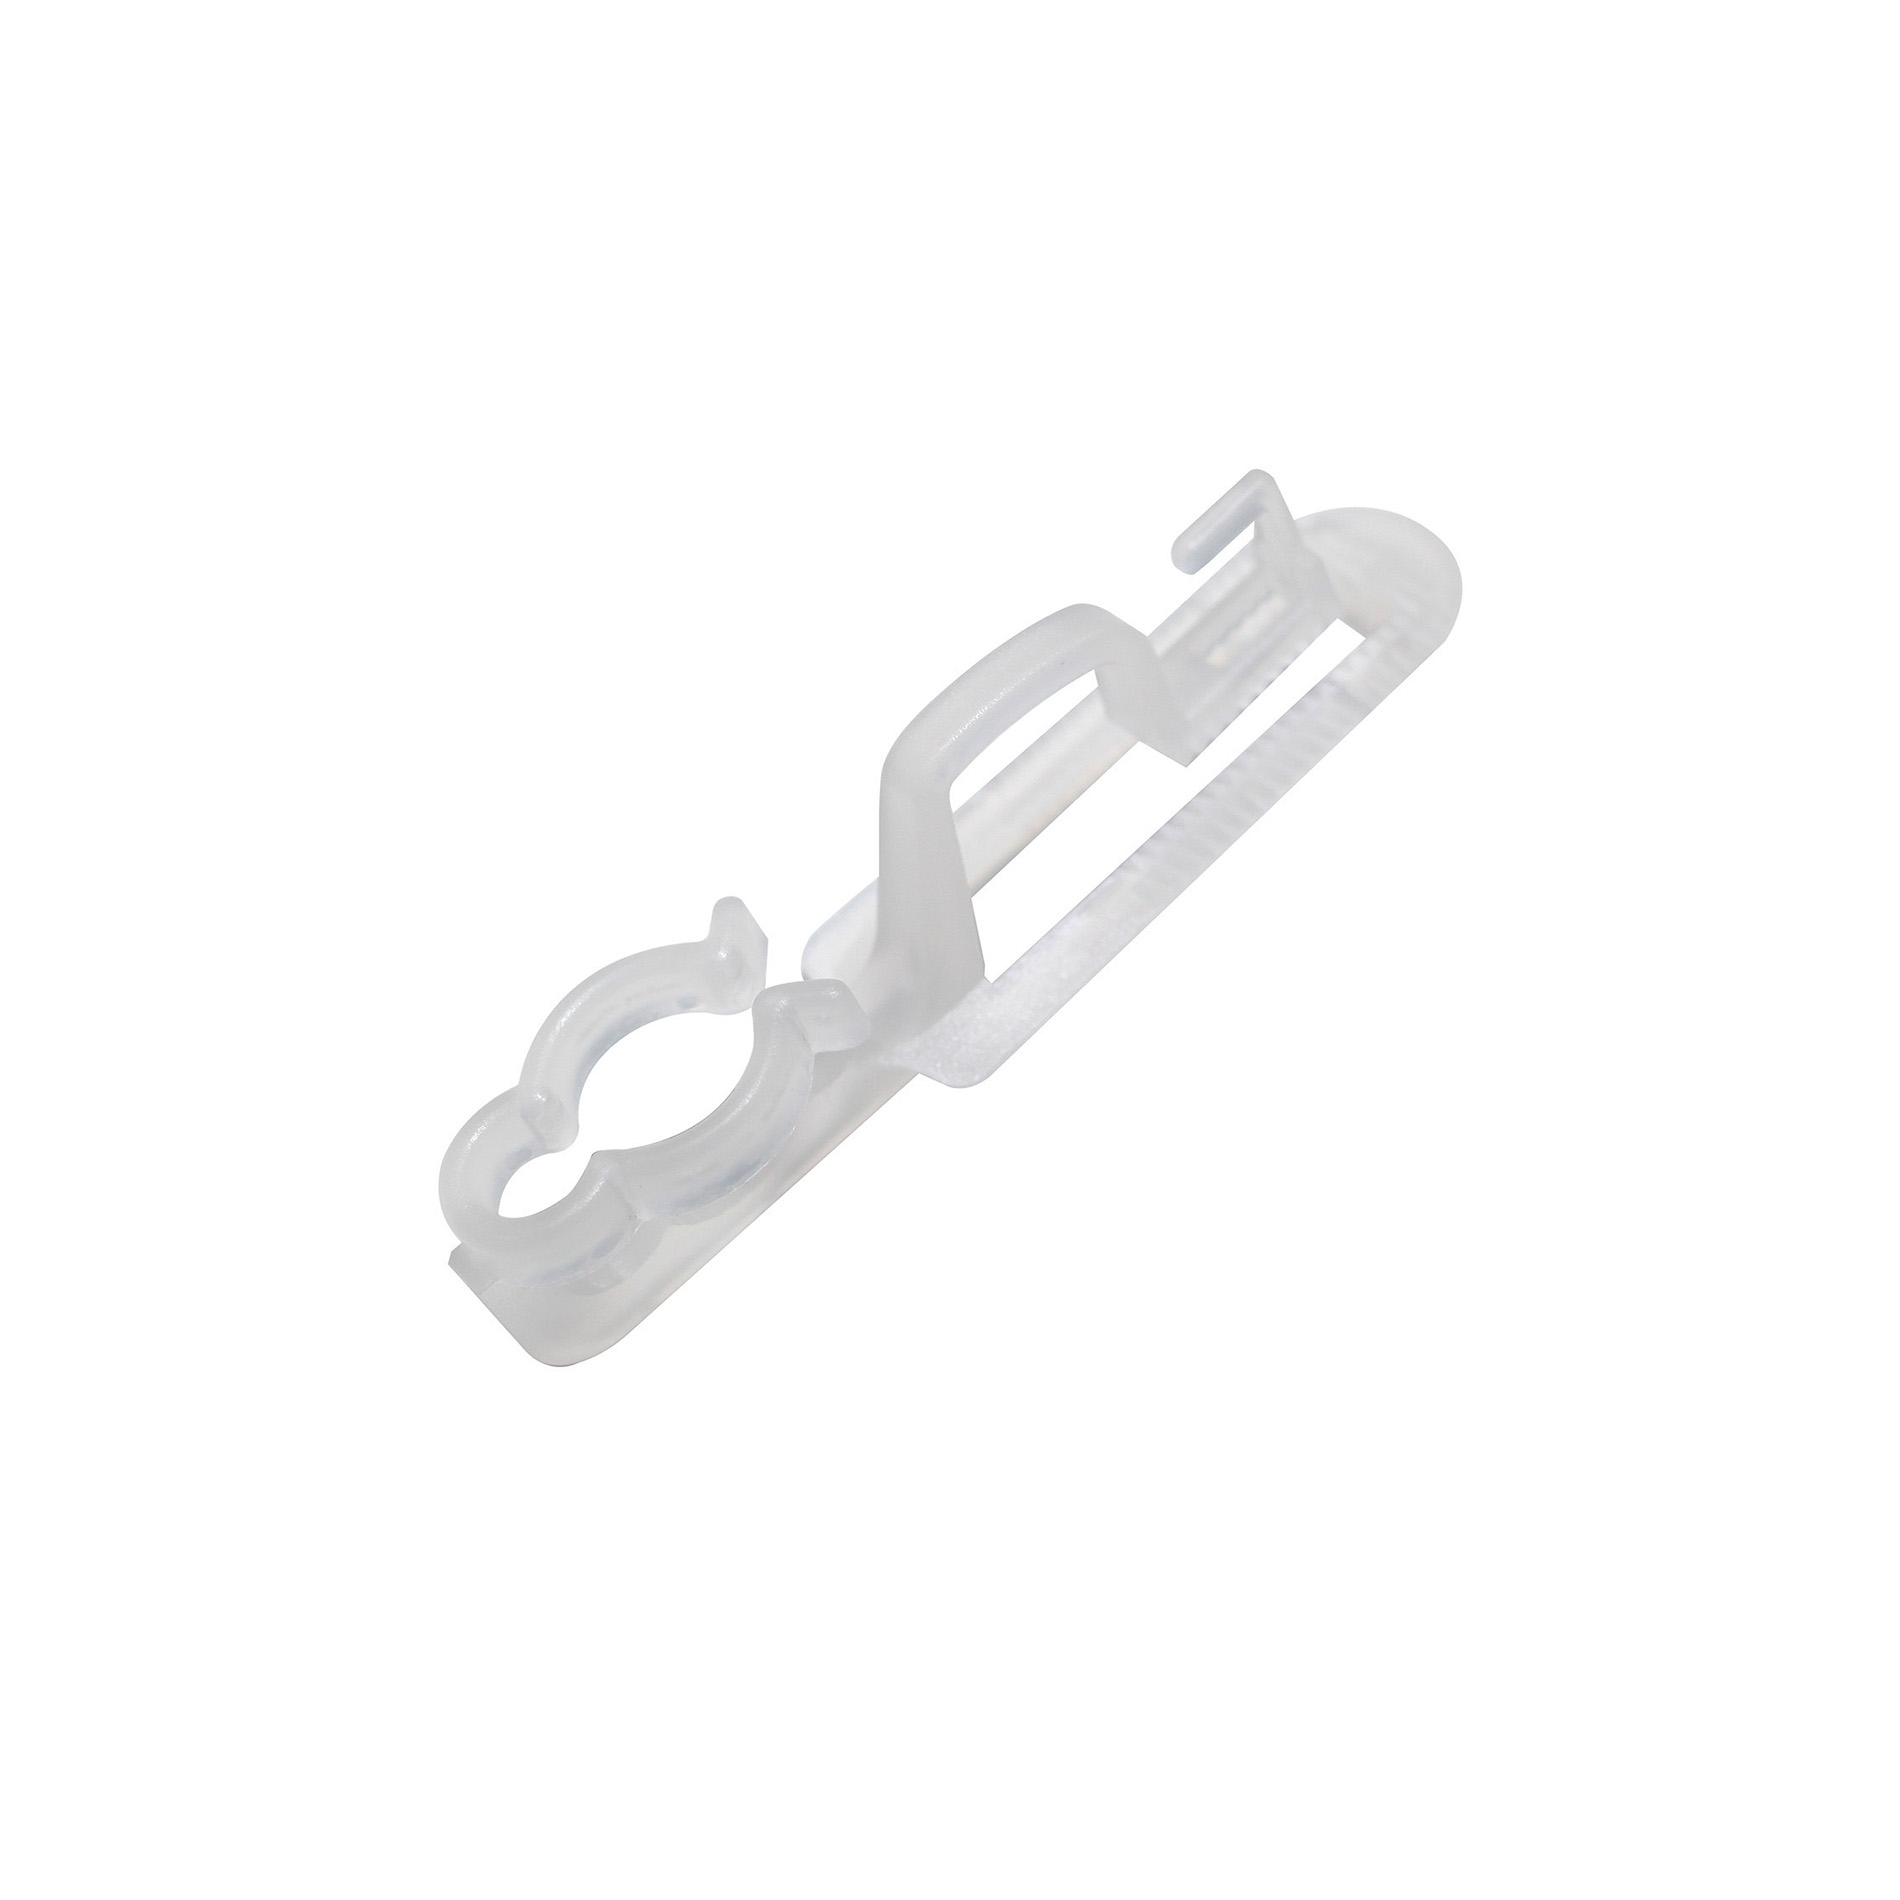 100 CT Universal Gutter/Shingle Clip for use with C-Lights  Icicle  Mini and Tube Lights- Clear